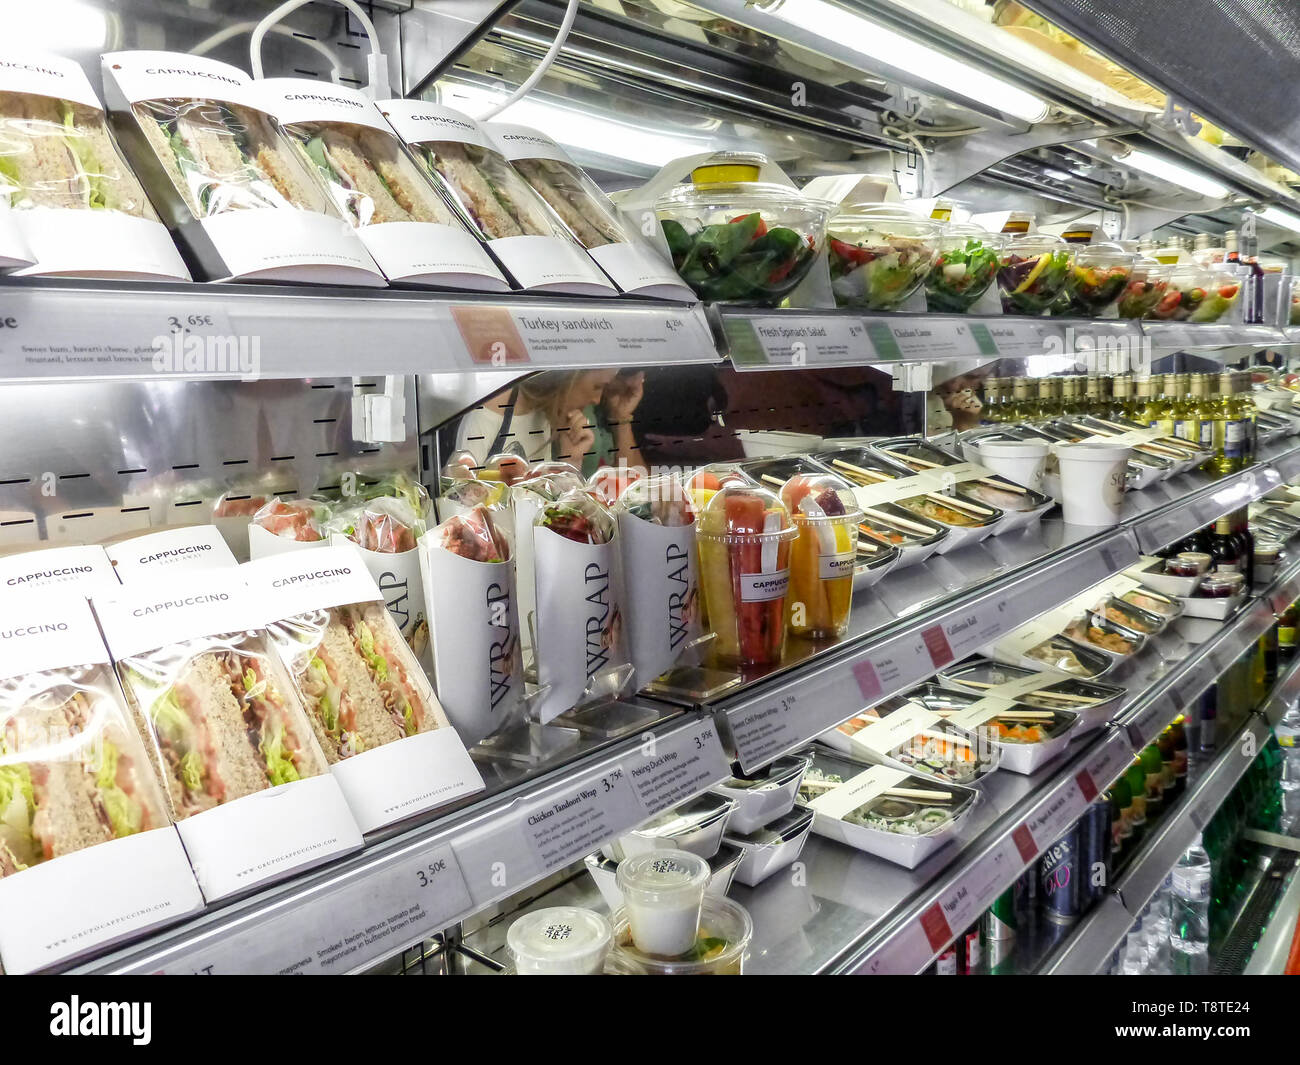 Bad habits of the human in modern times: shelf full of pre-packaged foods, ready to eat. Plastic abuse to contain ready-to-eat salads, sandwiches, fru Stock Photo